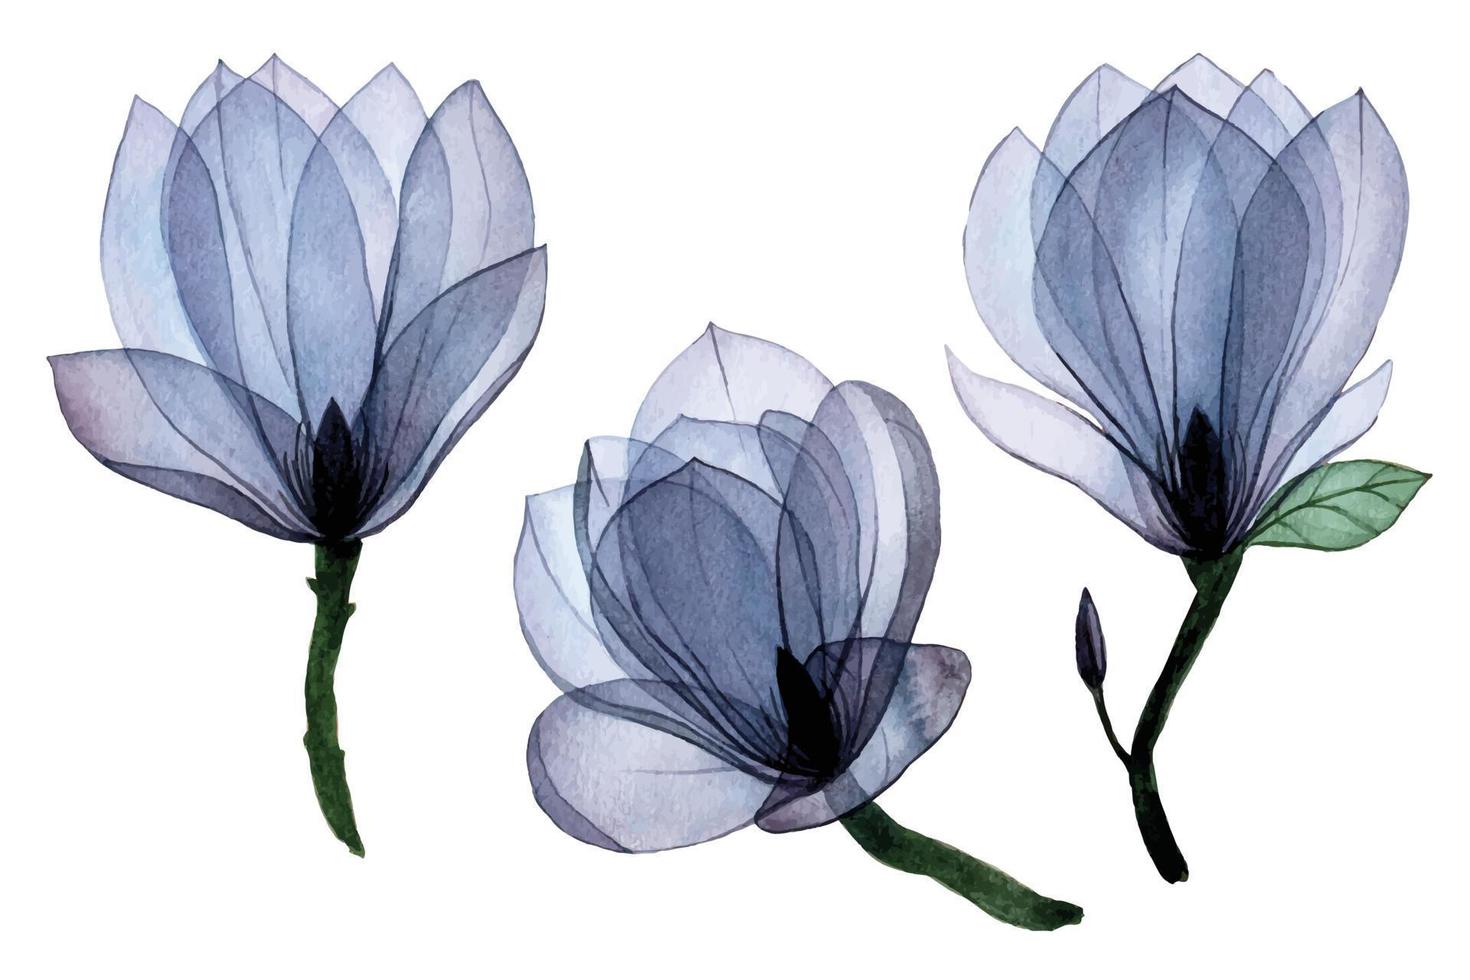 watercolor drawing set with transparent magnolia flowers. transparent flowers blue isolated elements. vector